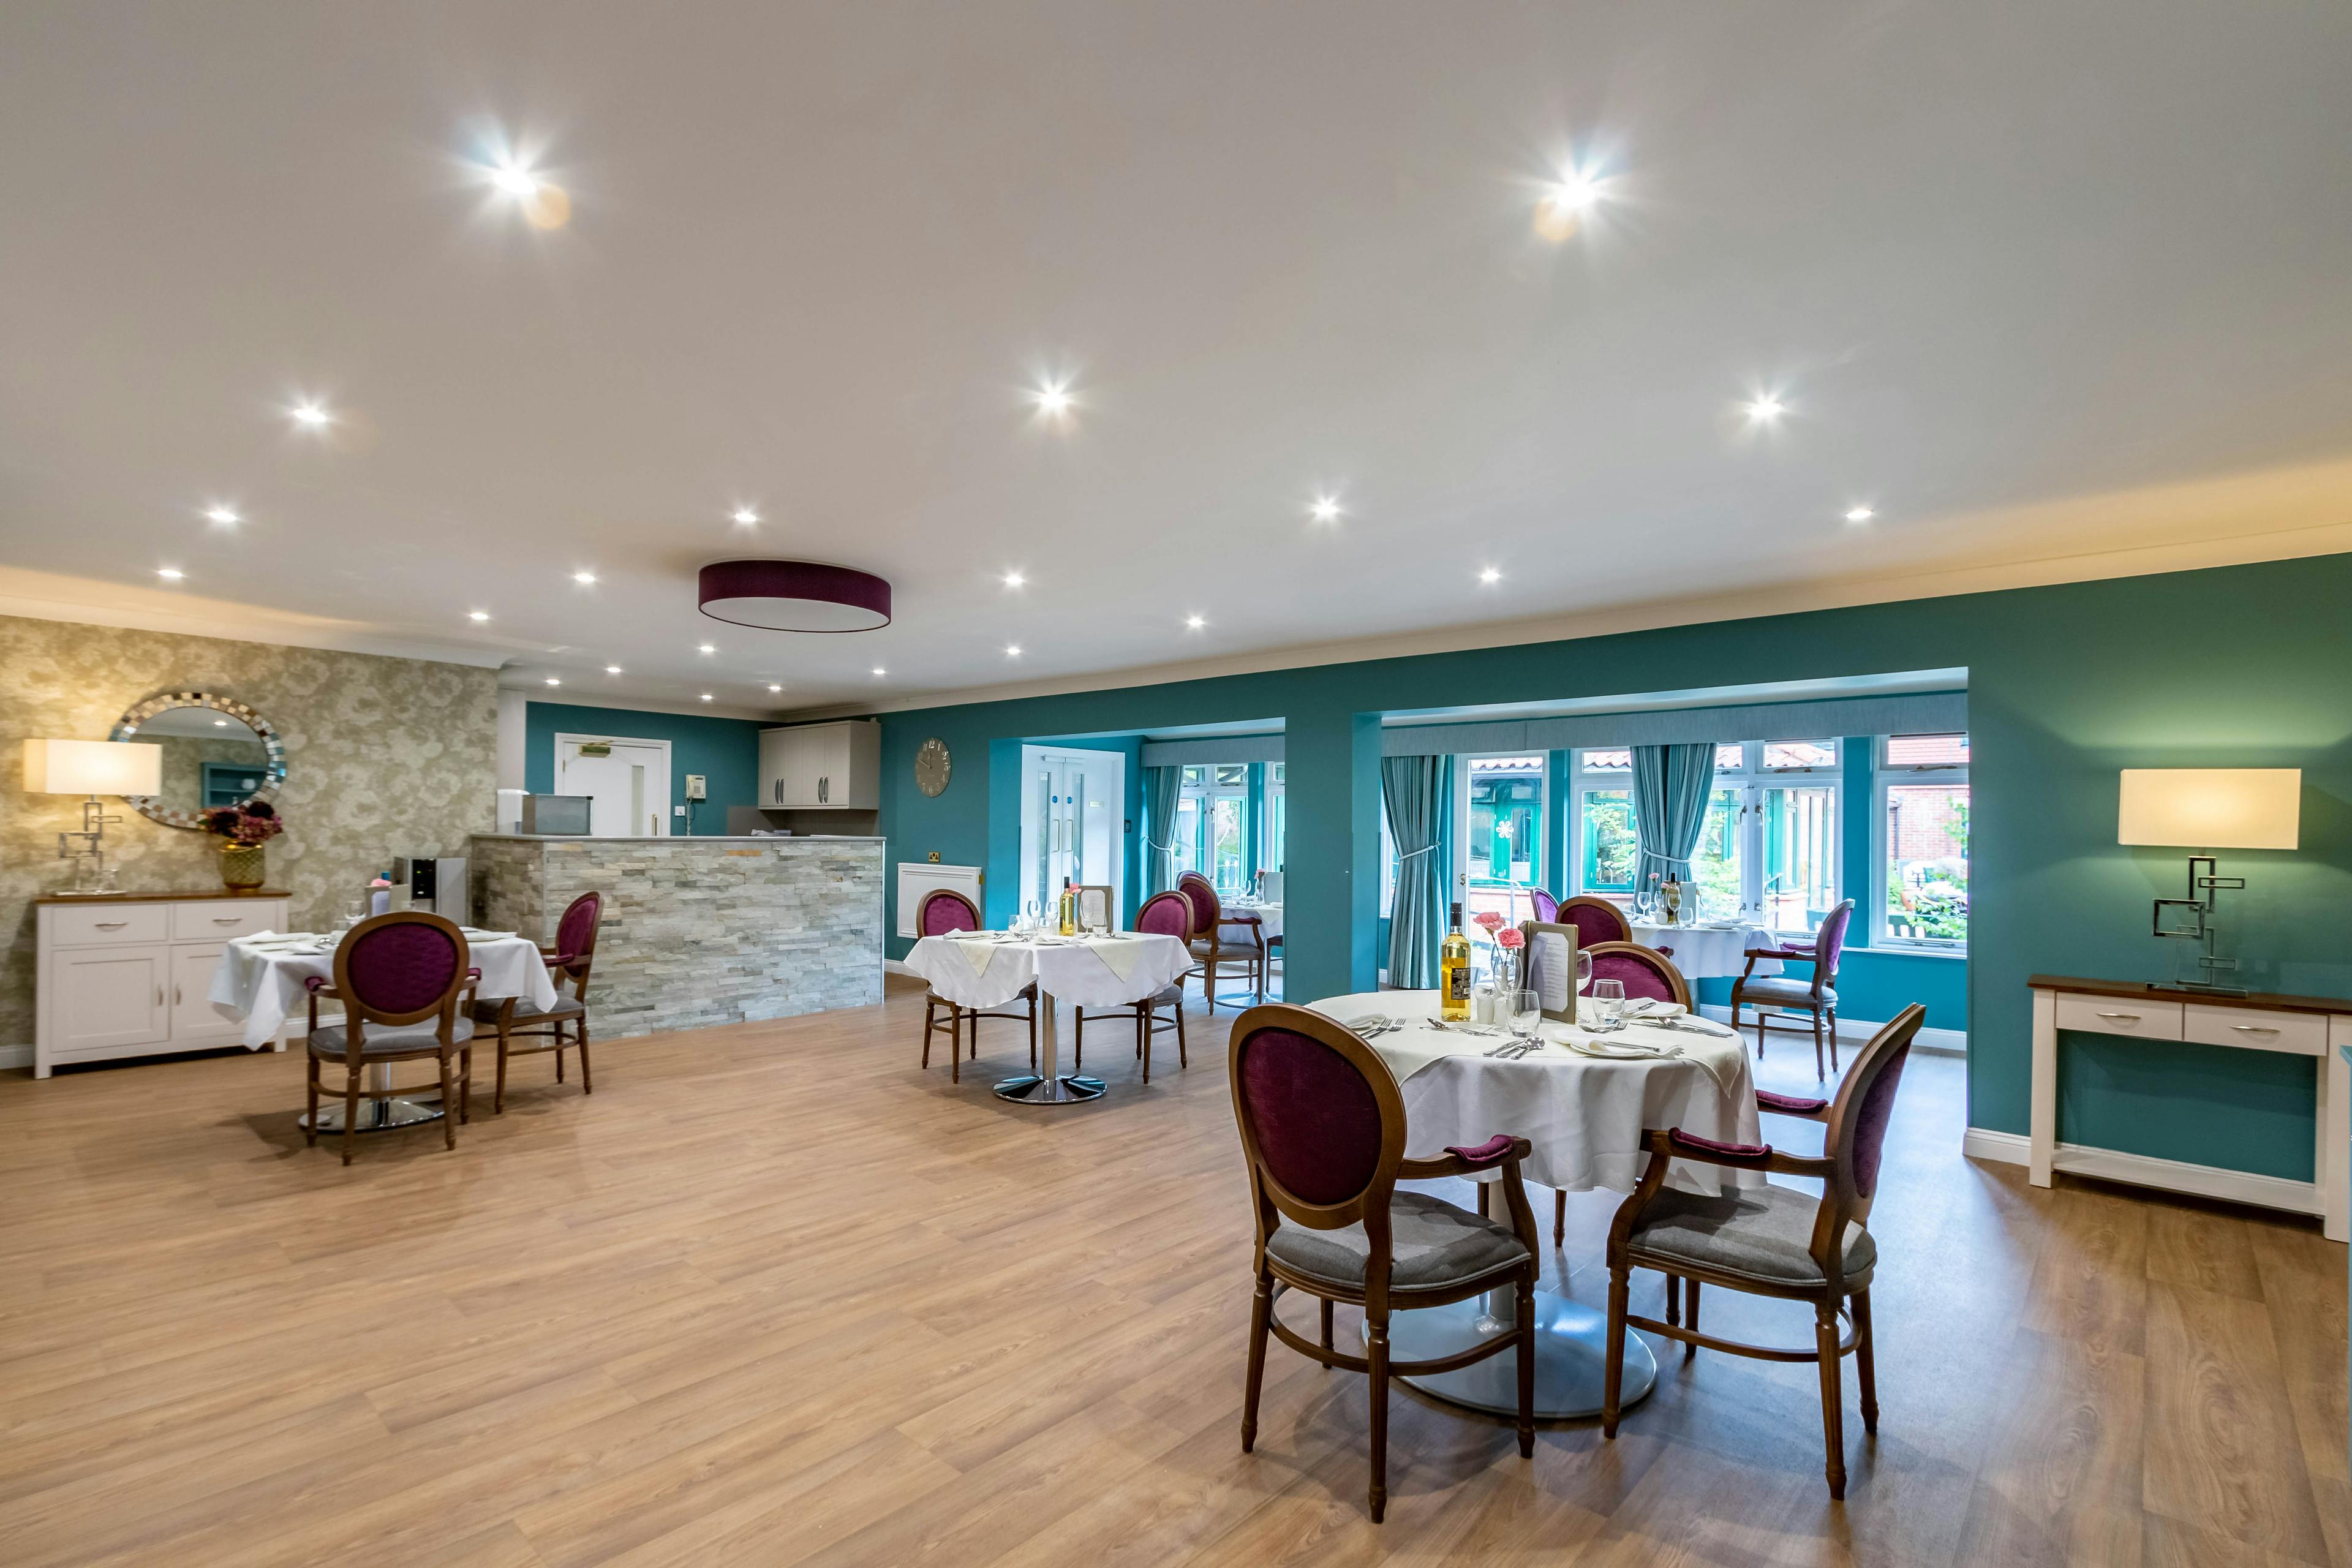 Dining Room at Longueville Court Care Home in Peterborough, Cambridgeshire